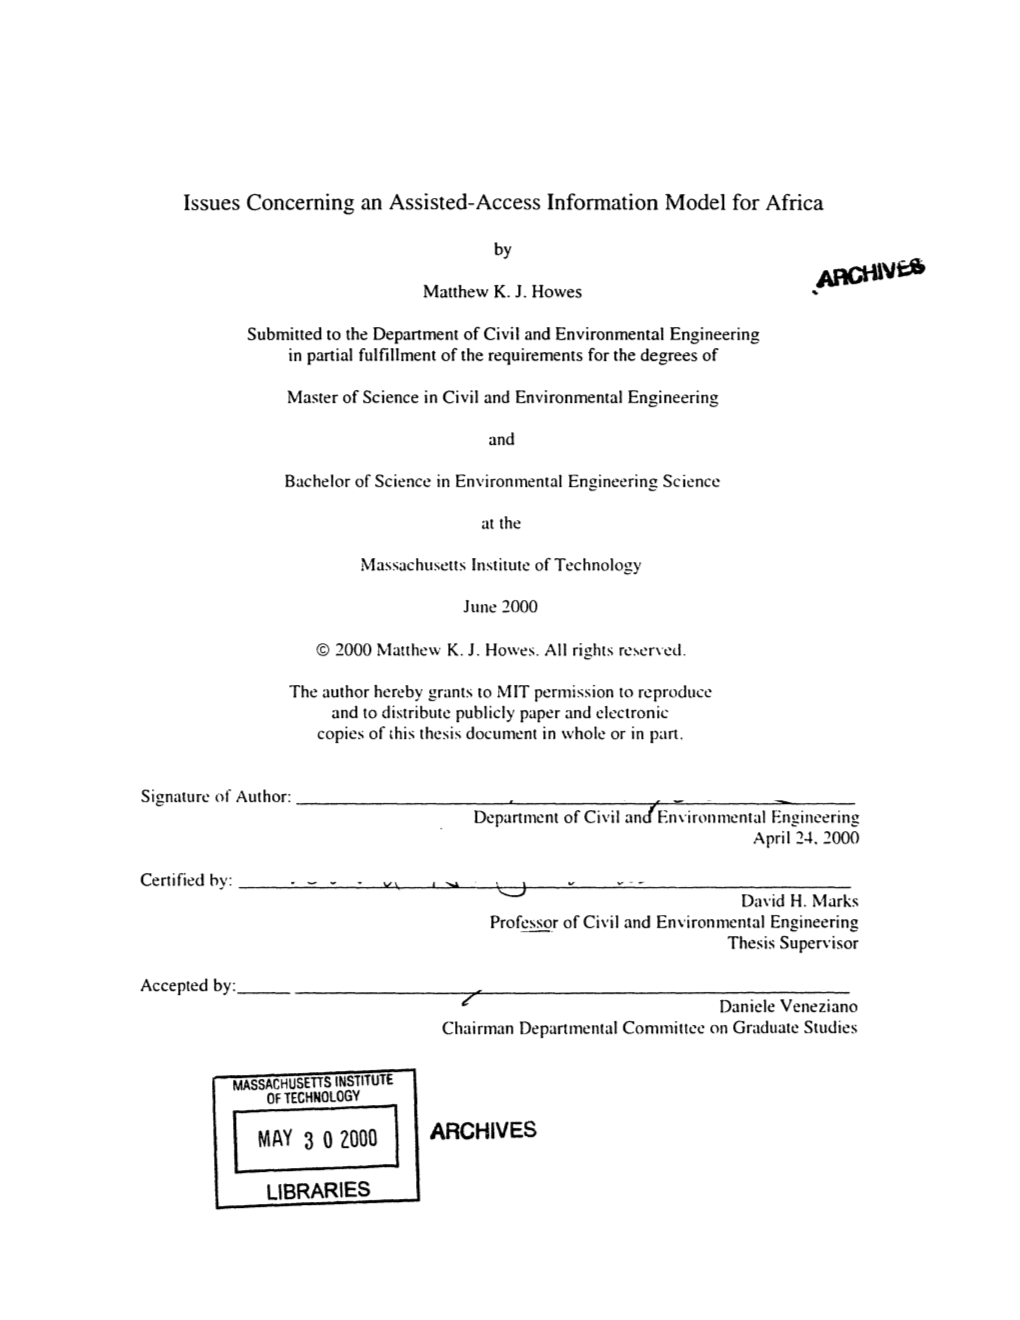 Issues Concerning an Assisted-Access Information Model for Africa